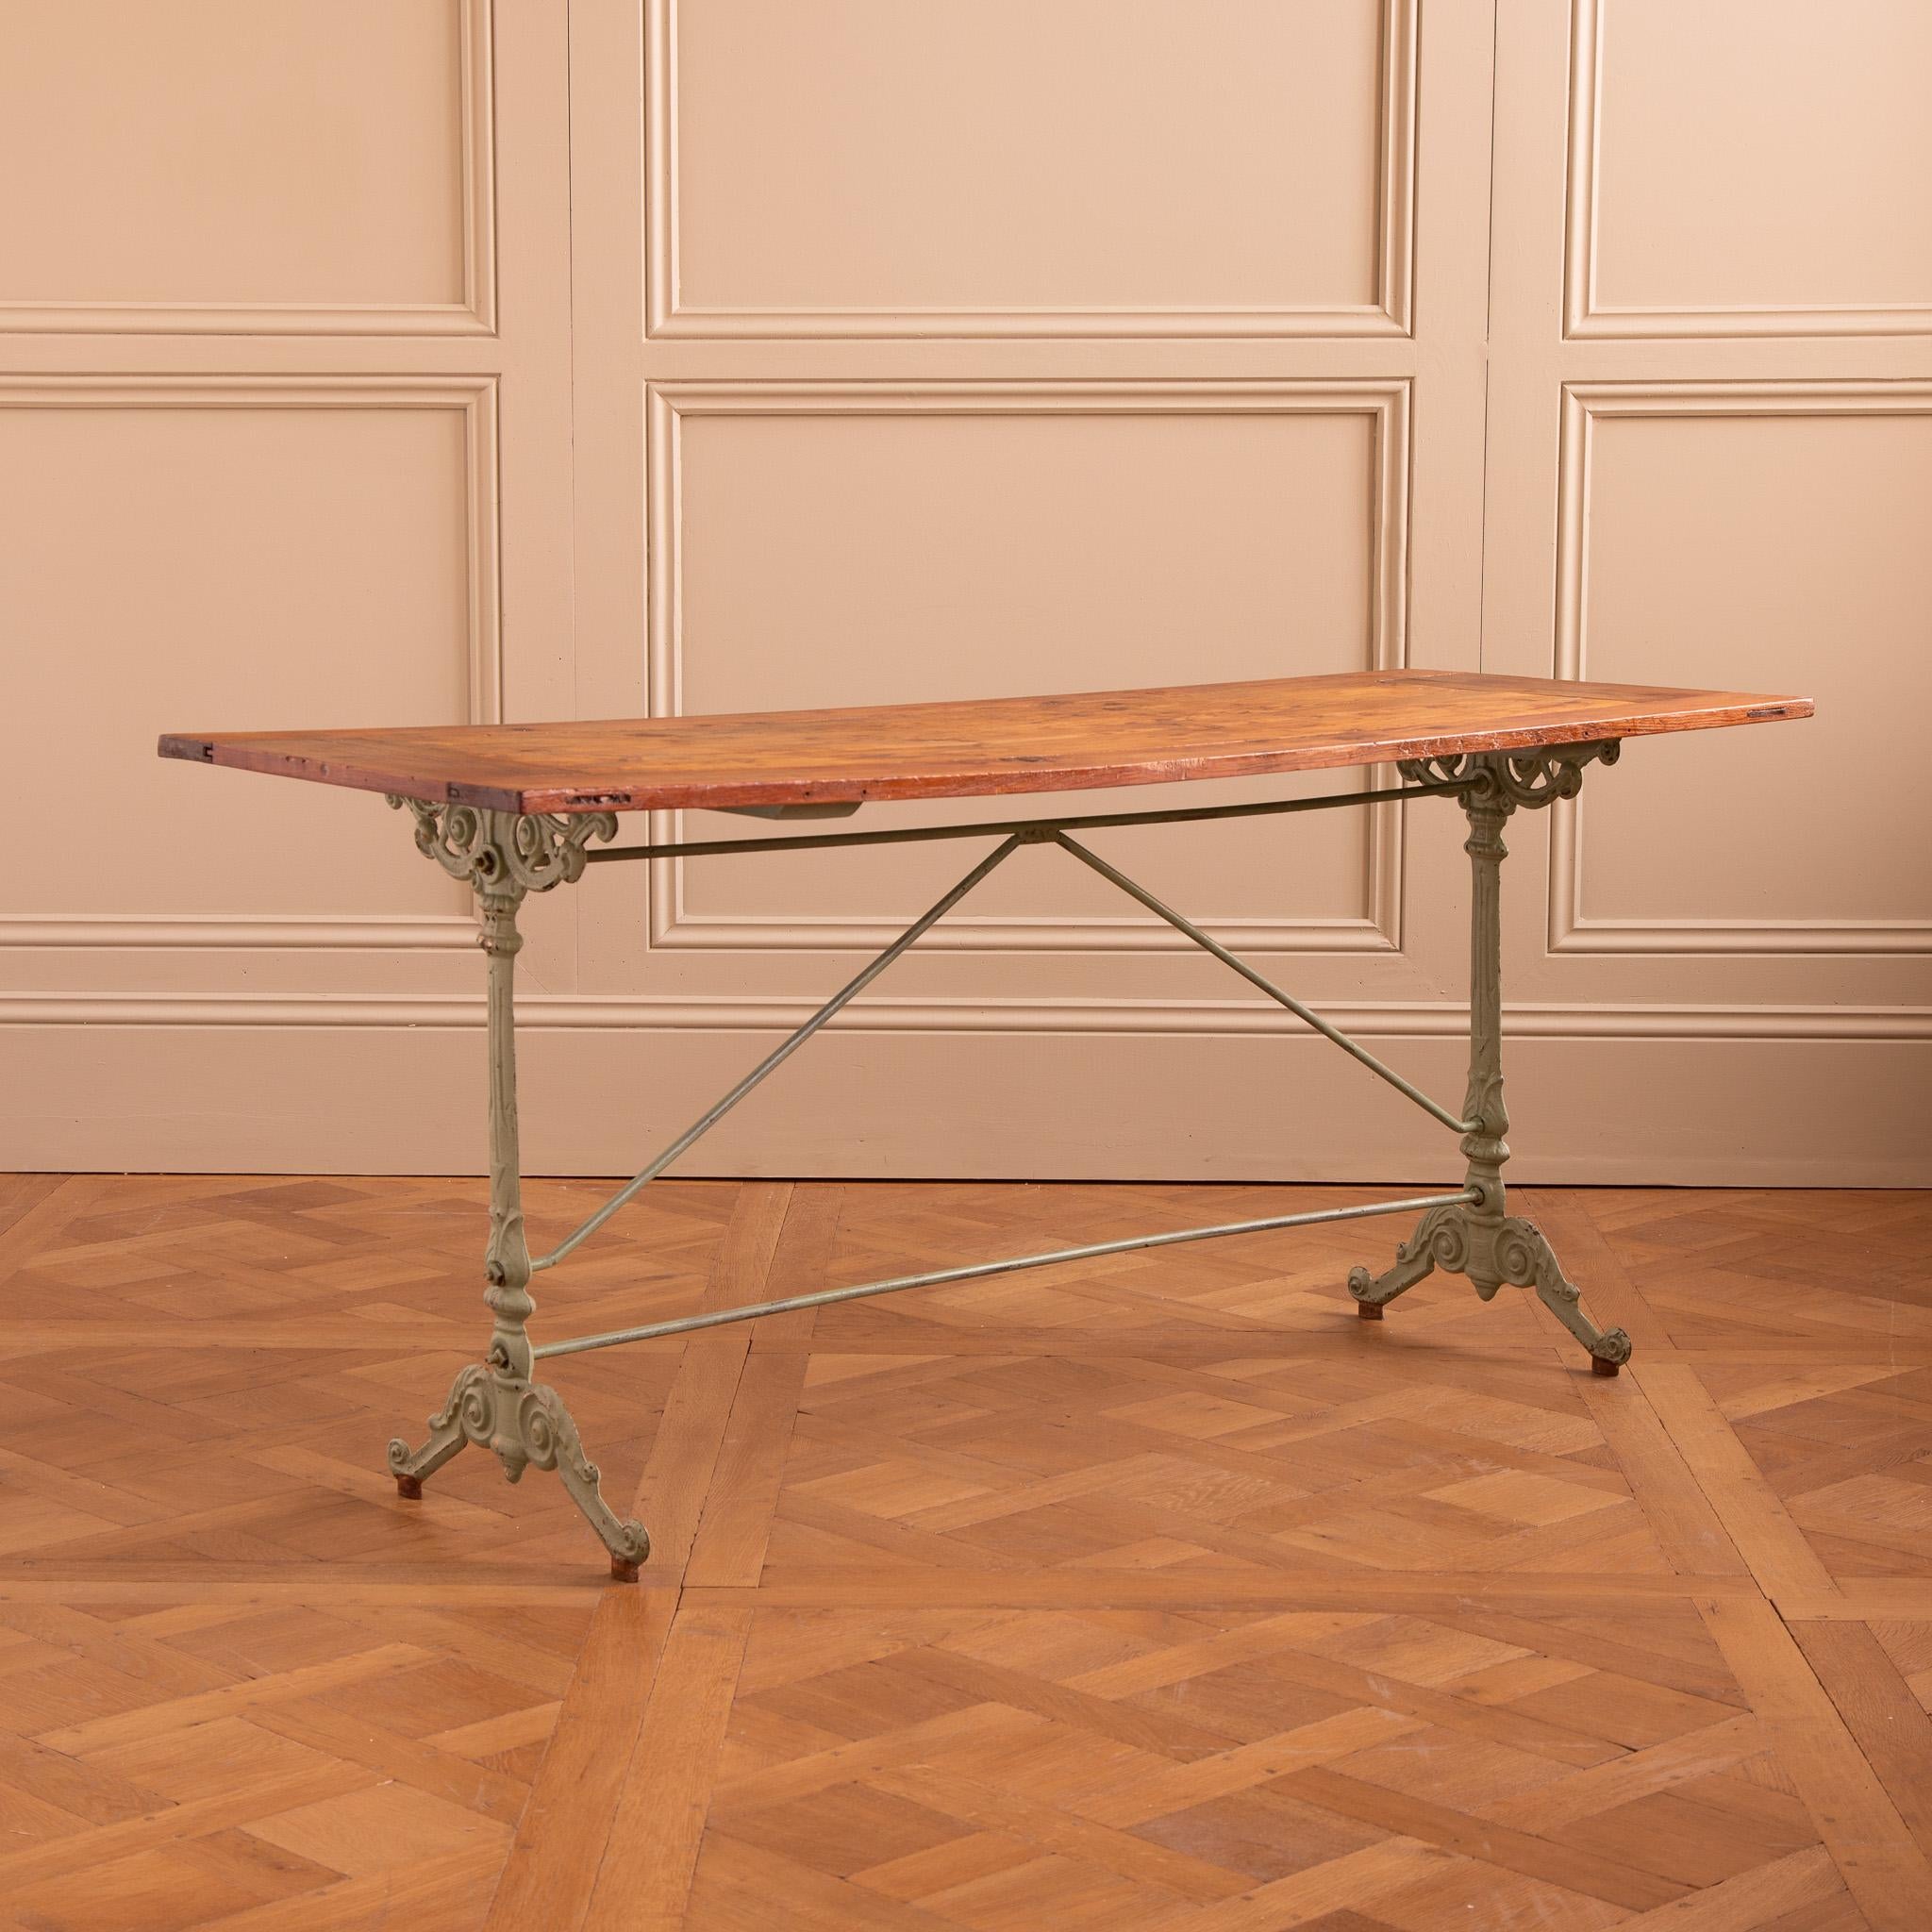 A French bistro cafe table from the Early 1900's with a decoratively cast iron base painted in a typical Art deco green. The table top is a nicely aged, old Douglas wood with lots of character. The proportions have a slimline width-to-length ratio